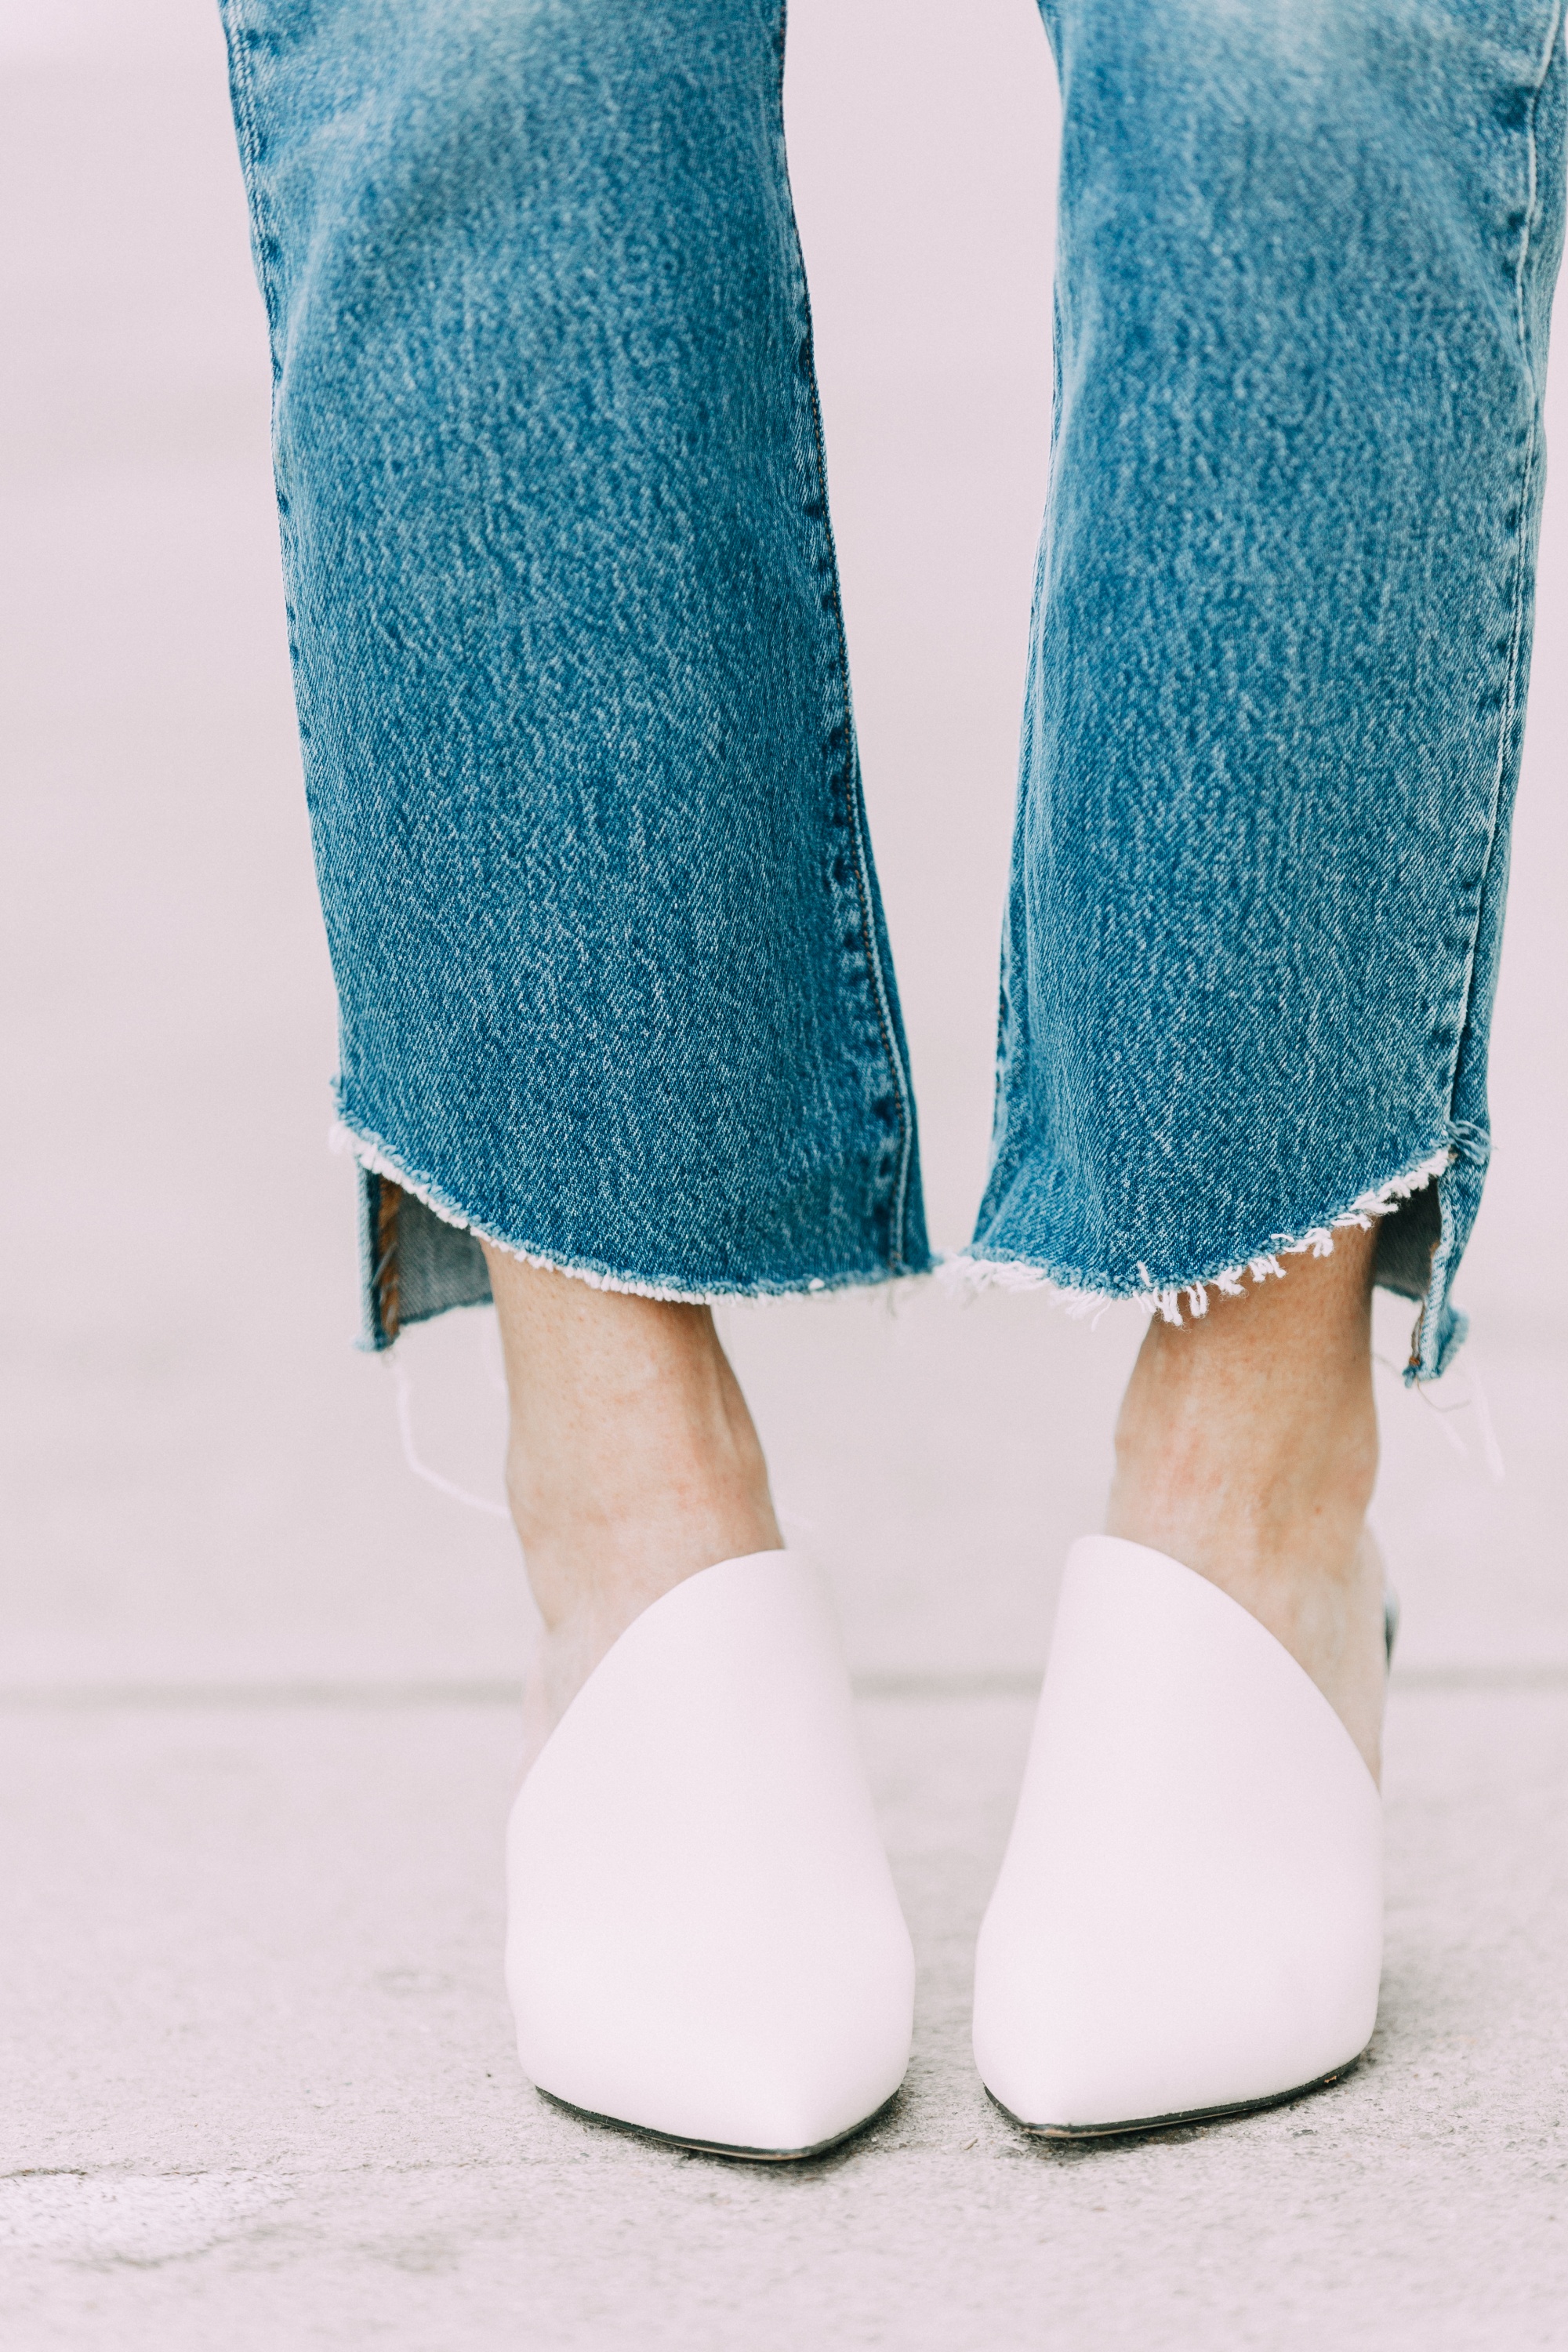 Spring Fashion, Levi jeans and Via Spiga white mules from Bloomingdale's worn by fashion blogger Erin Busbee of BusbeeStyle.com in Telluride, CO